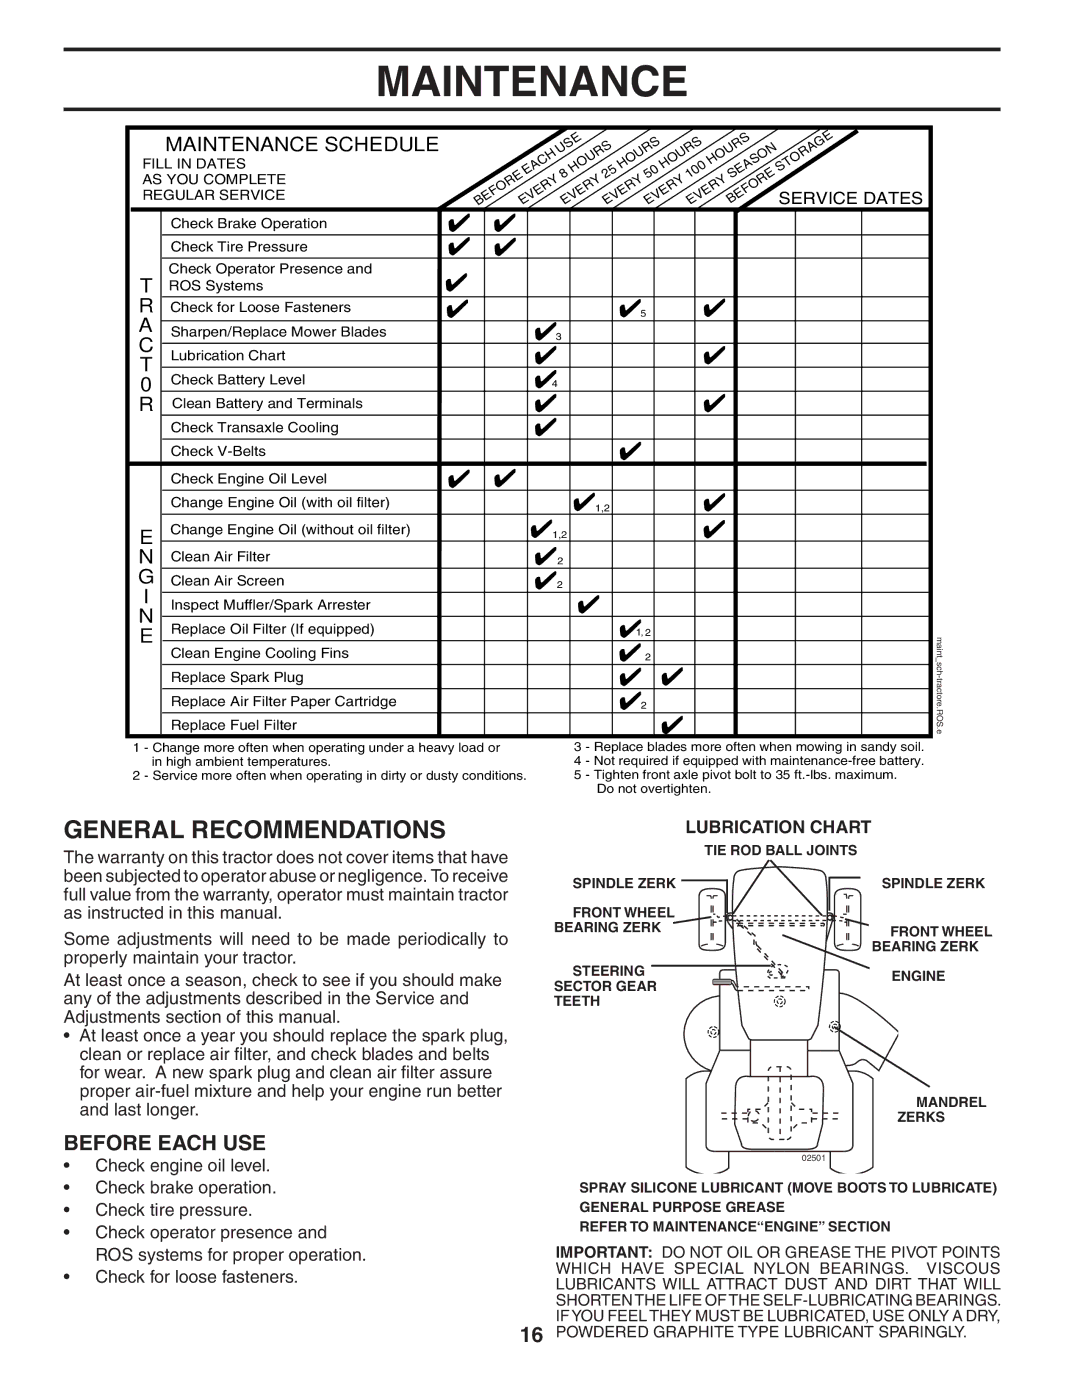 Poulan 195806 manual Maintenance, General Recommendations, Before Each USE, Service Dates, Lubrication Chart 